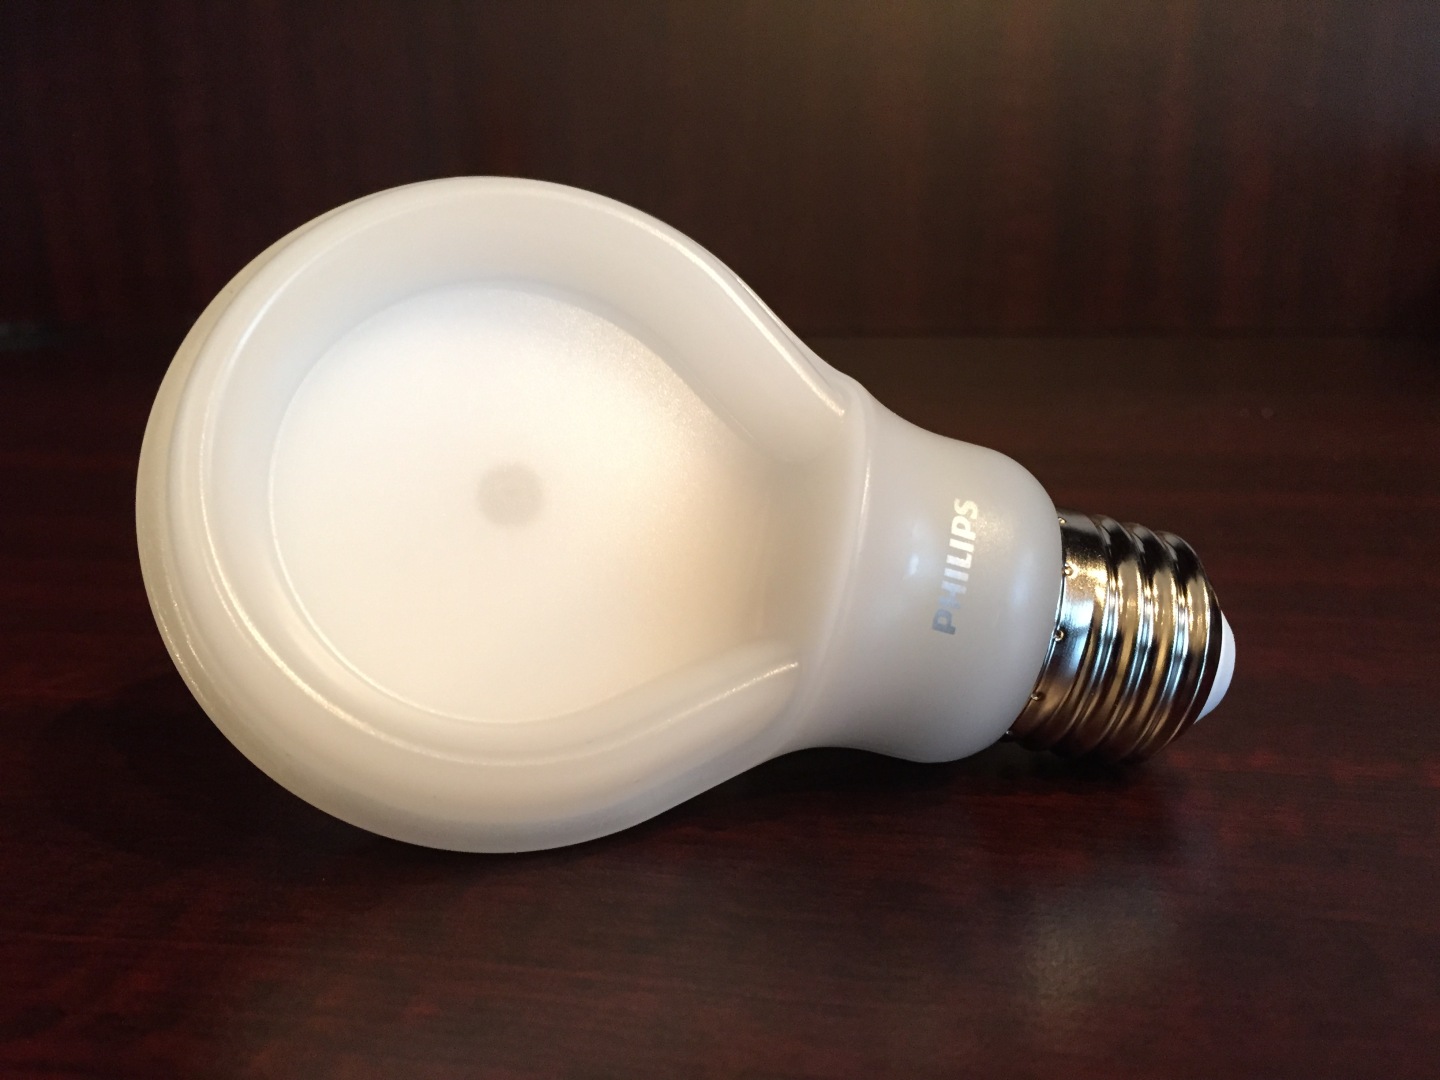 REVIEW: Philips SlimStyle LED 60w Replacement Light Bulb Home Future